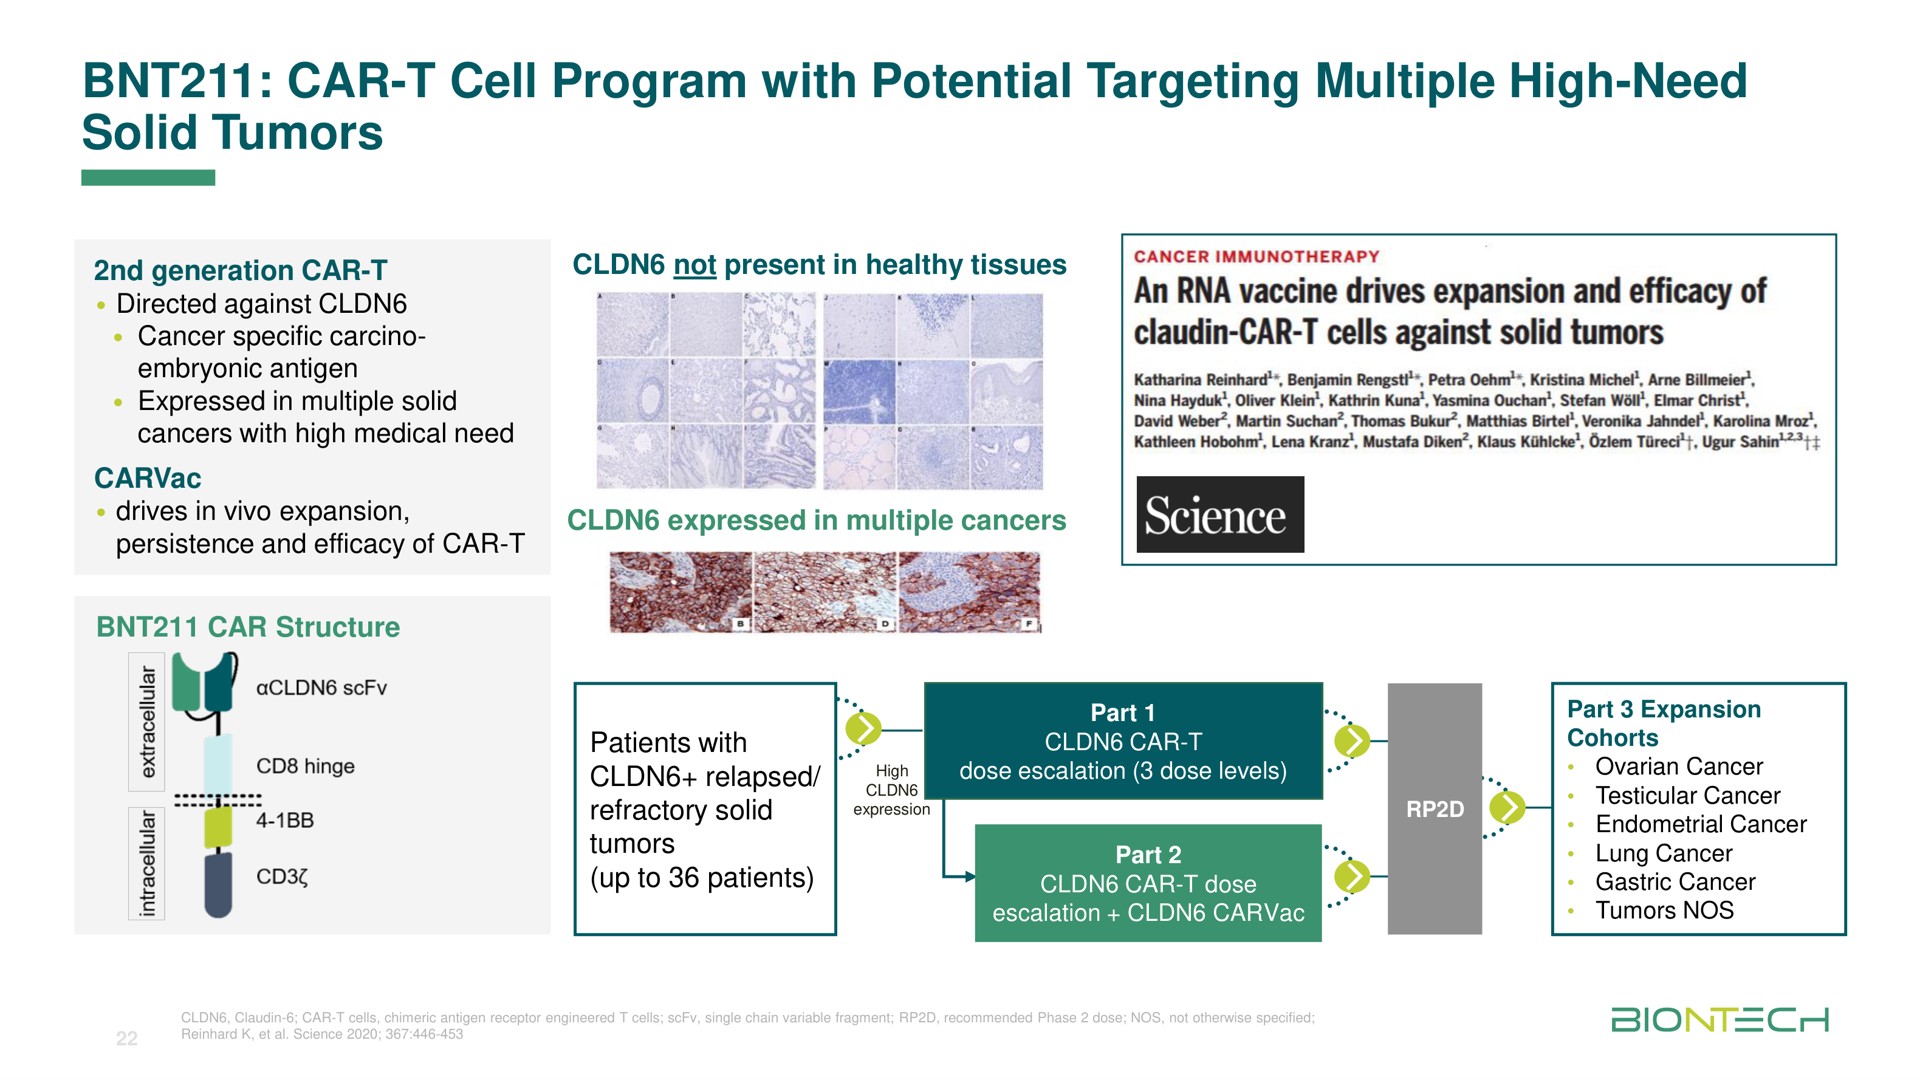 car cell program with potential targeting multiple high need solid tumors | BioNTech